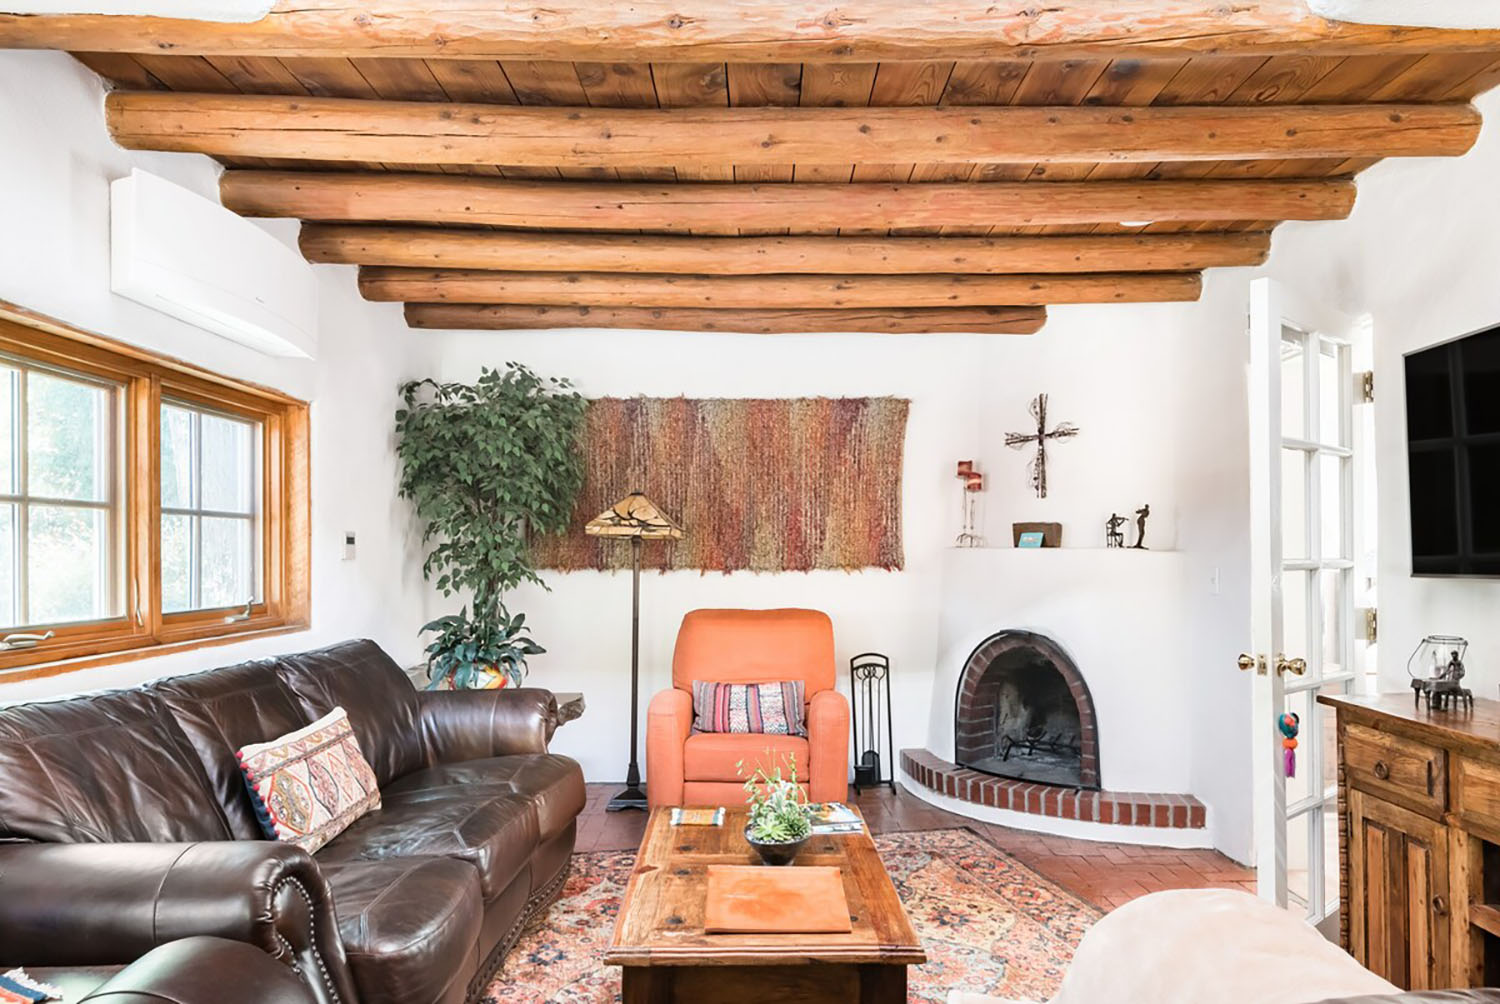 Canyon Road Lavender Trimmed Adobe Santa Fe New Mexico Airbnb